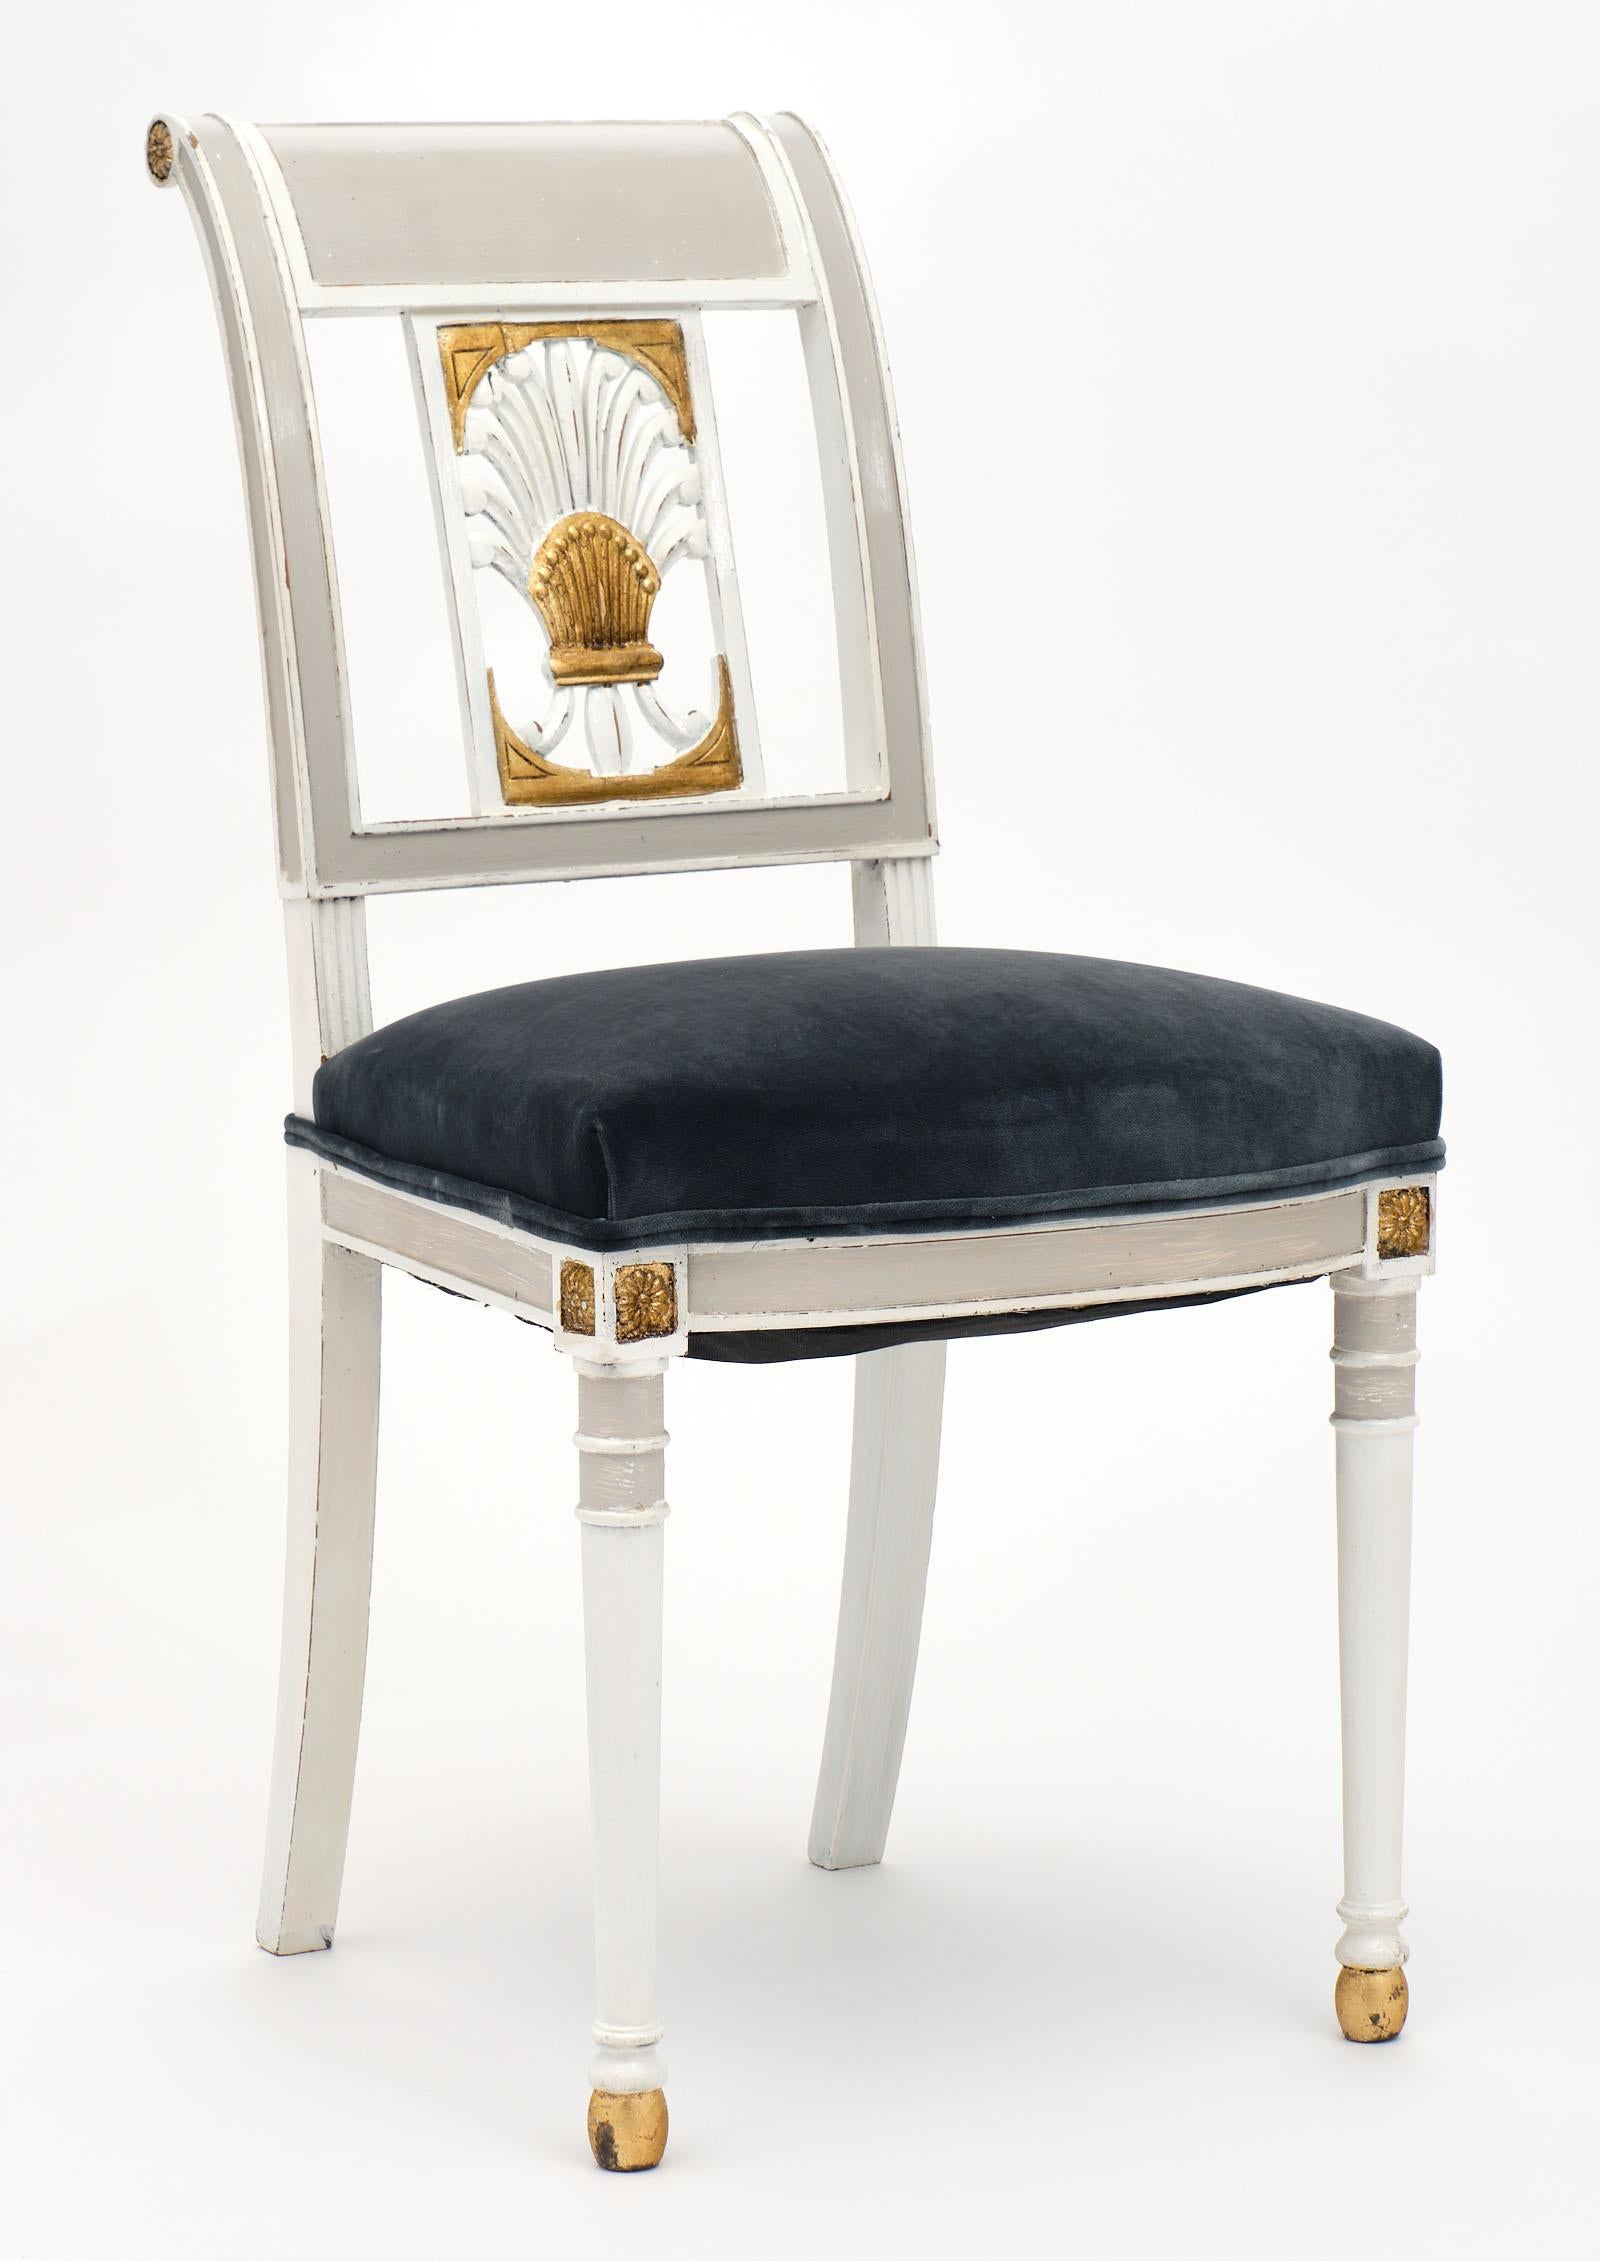 Directoire style antique painted French chairs in a “Trianon” gray color with white and gold leaf detailing. We love the elegant stylized acanthus leaf details on the backs and the tapered front legs with saber back legs. They have been newly